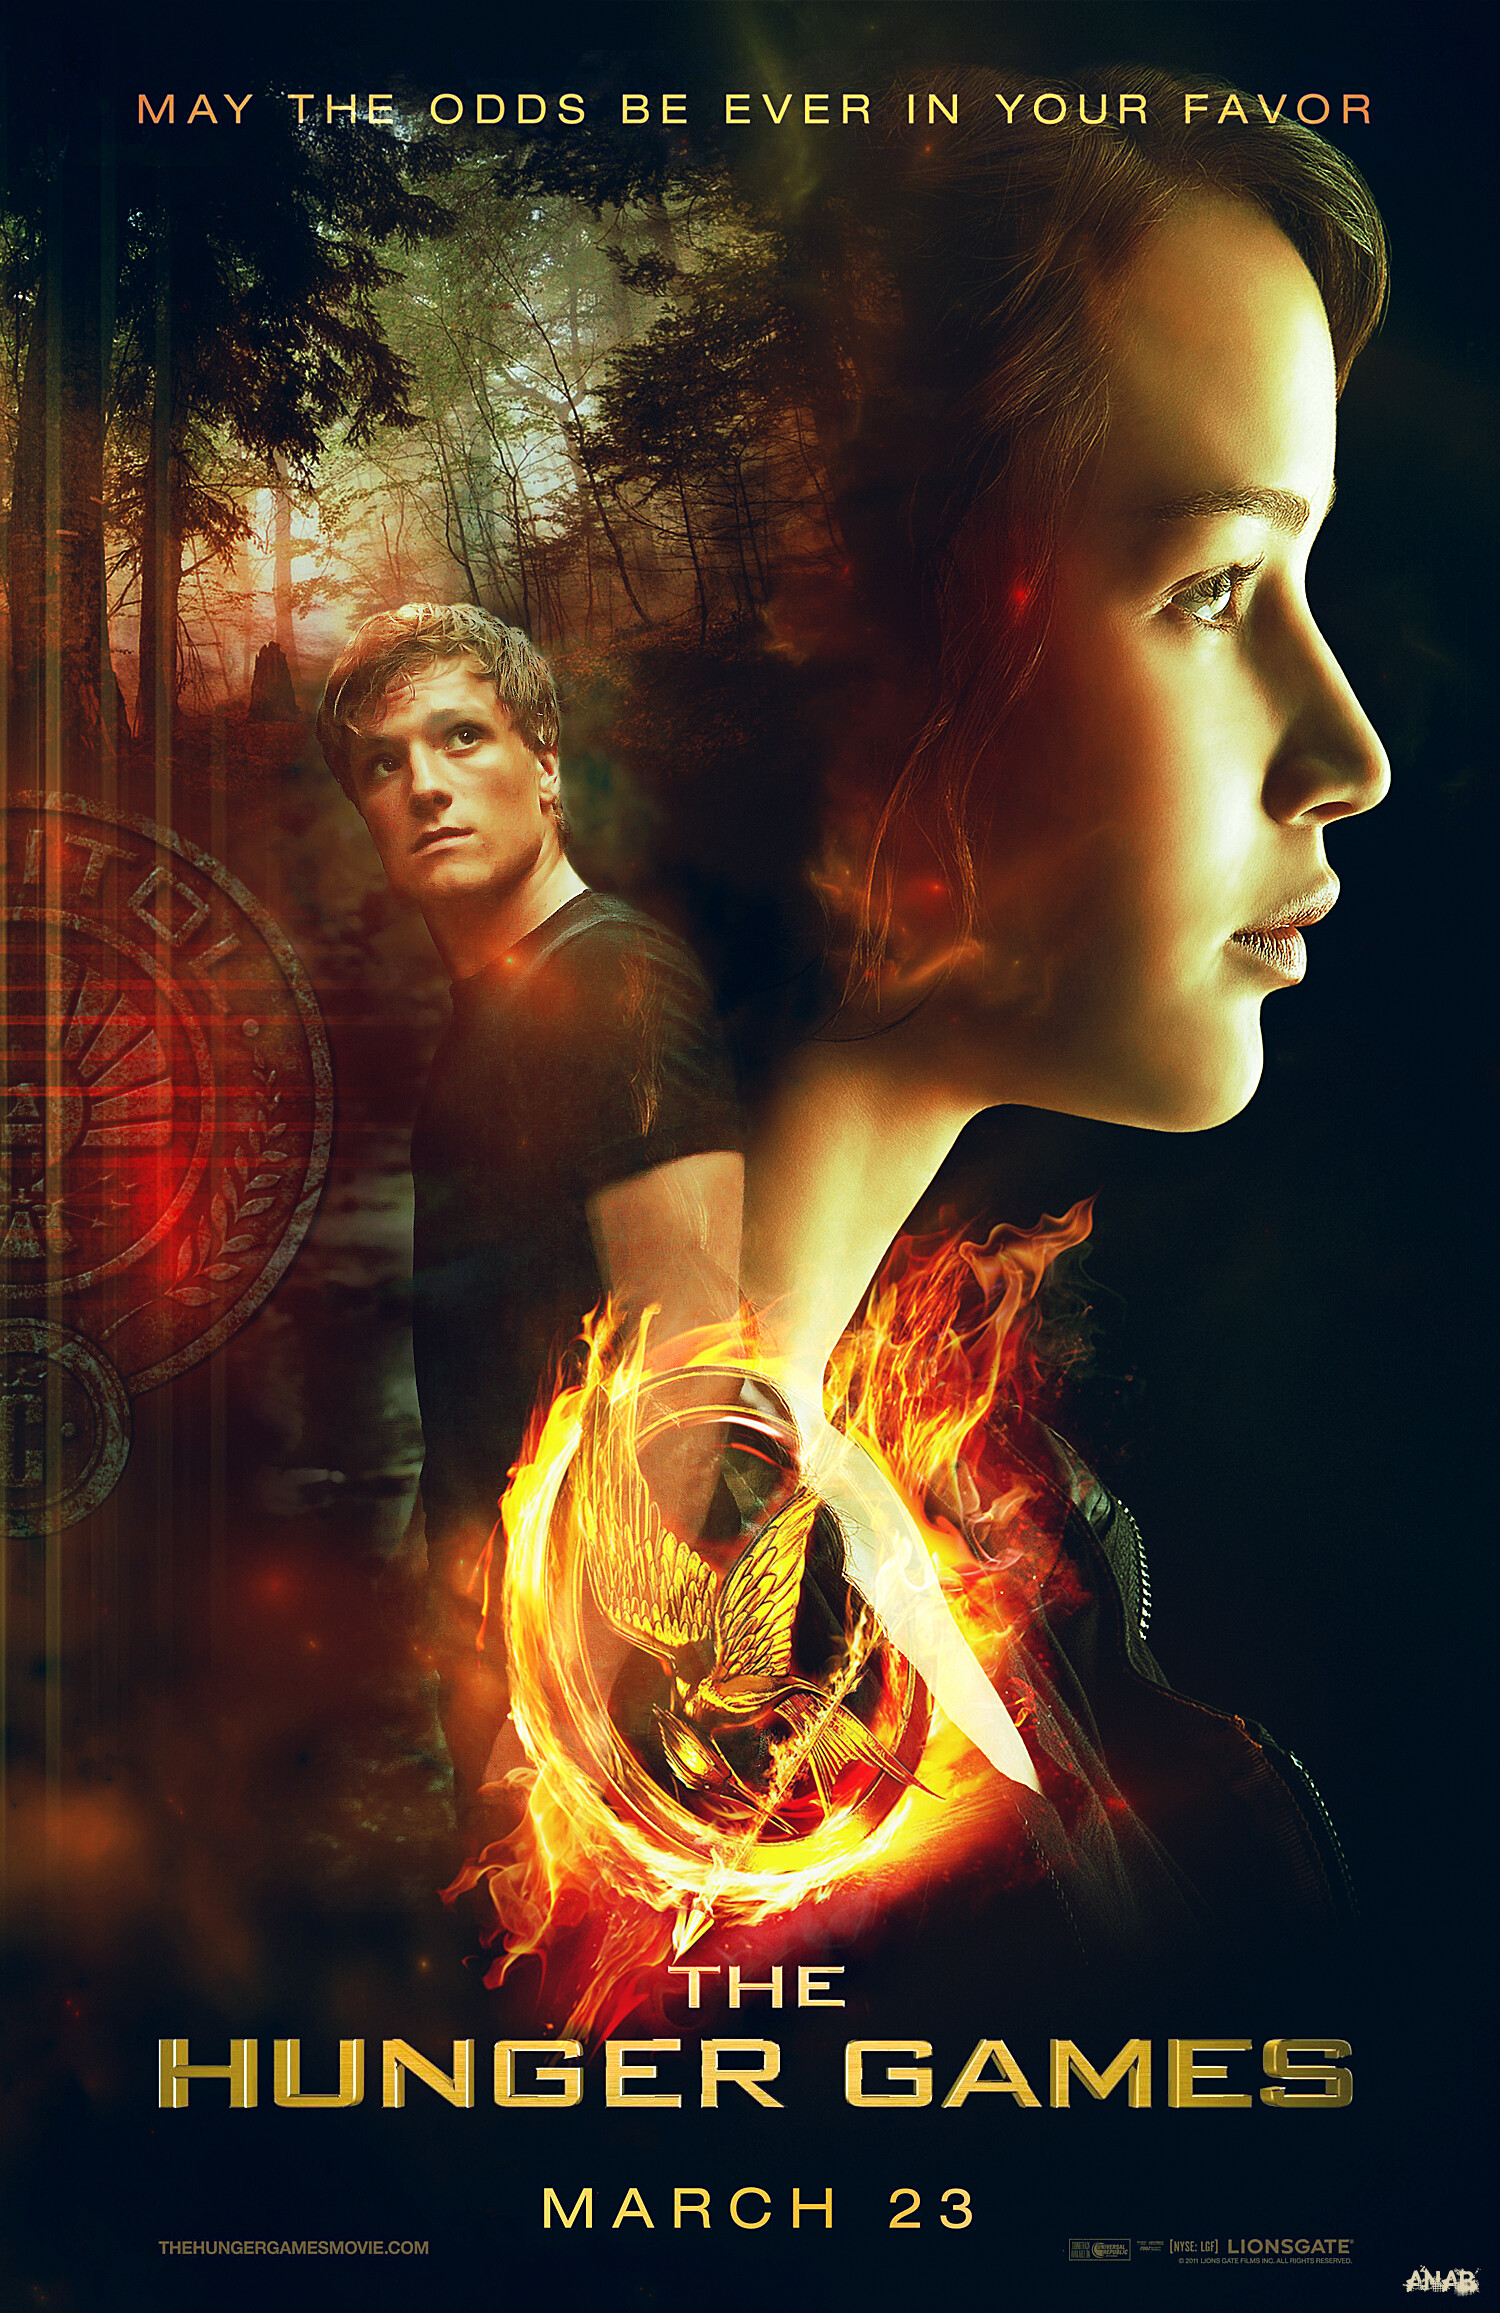 Ana Mueller The Hunger Games Fanmade Poster